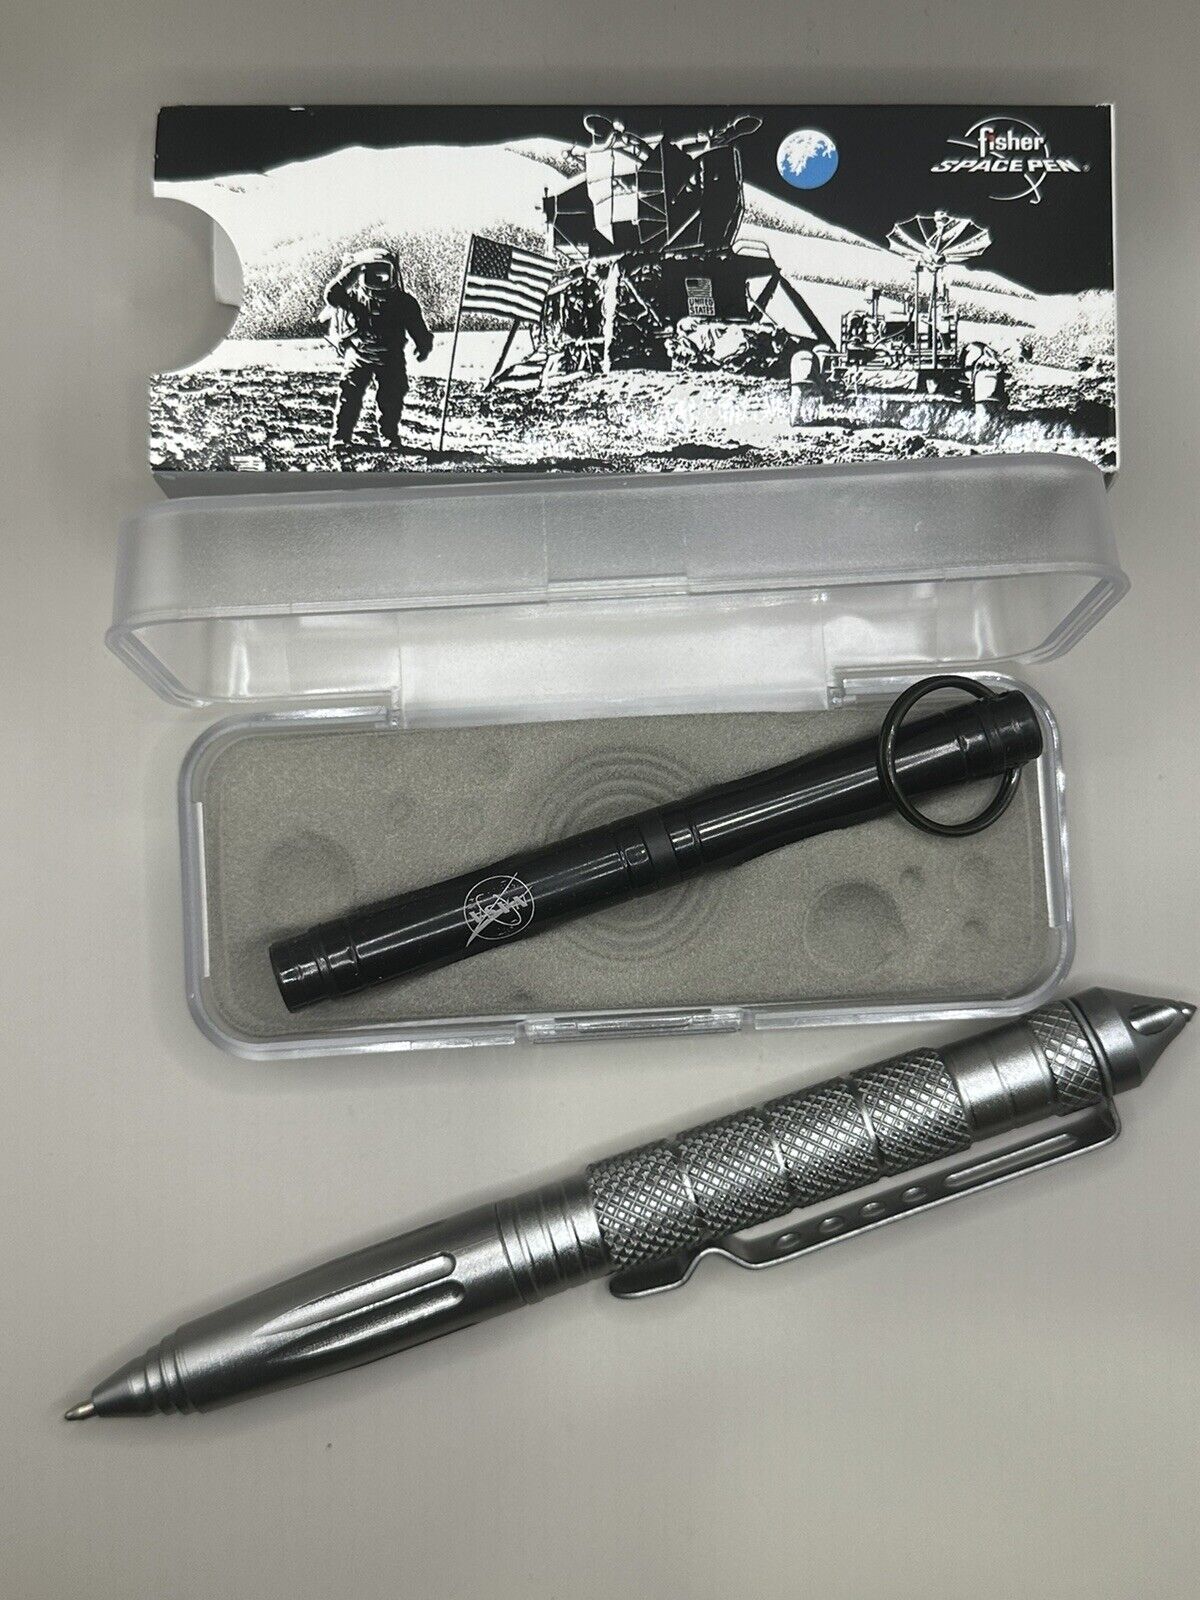 Fisher Space Pen Backpacker Keyring Pen Black With FREE Tactical Pen NASA